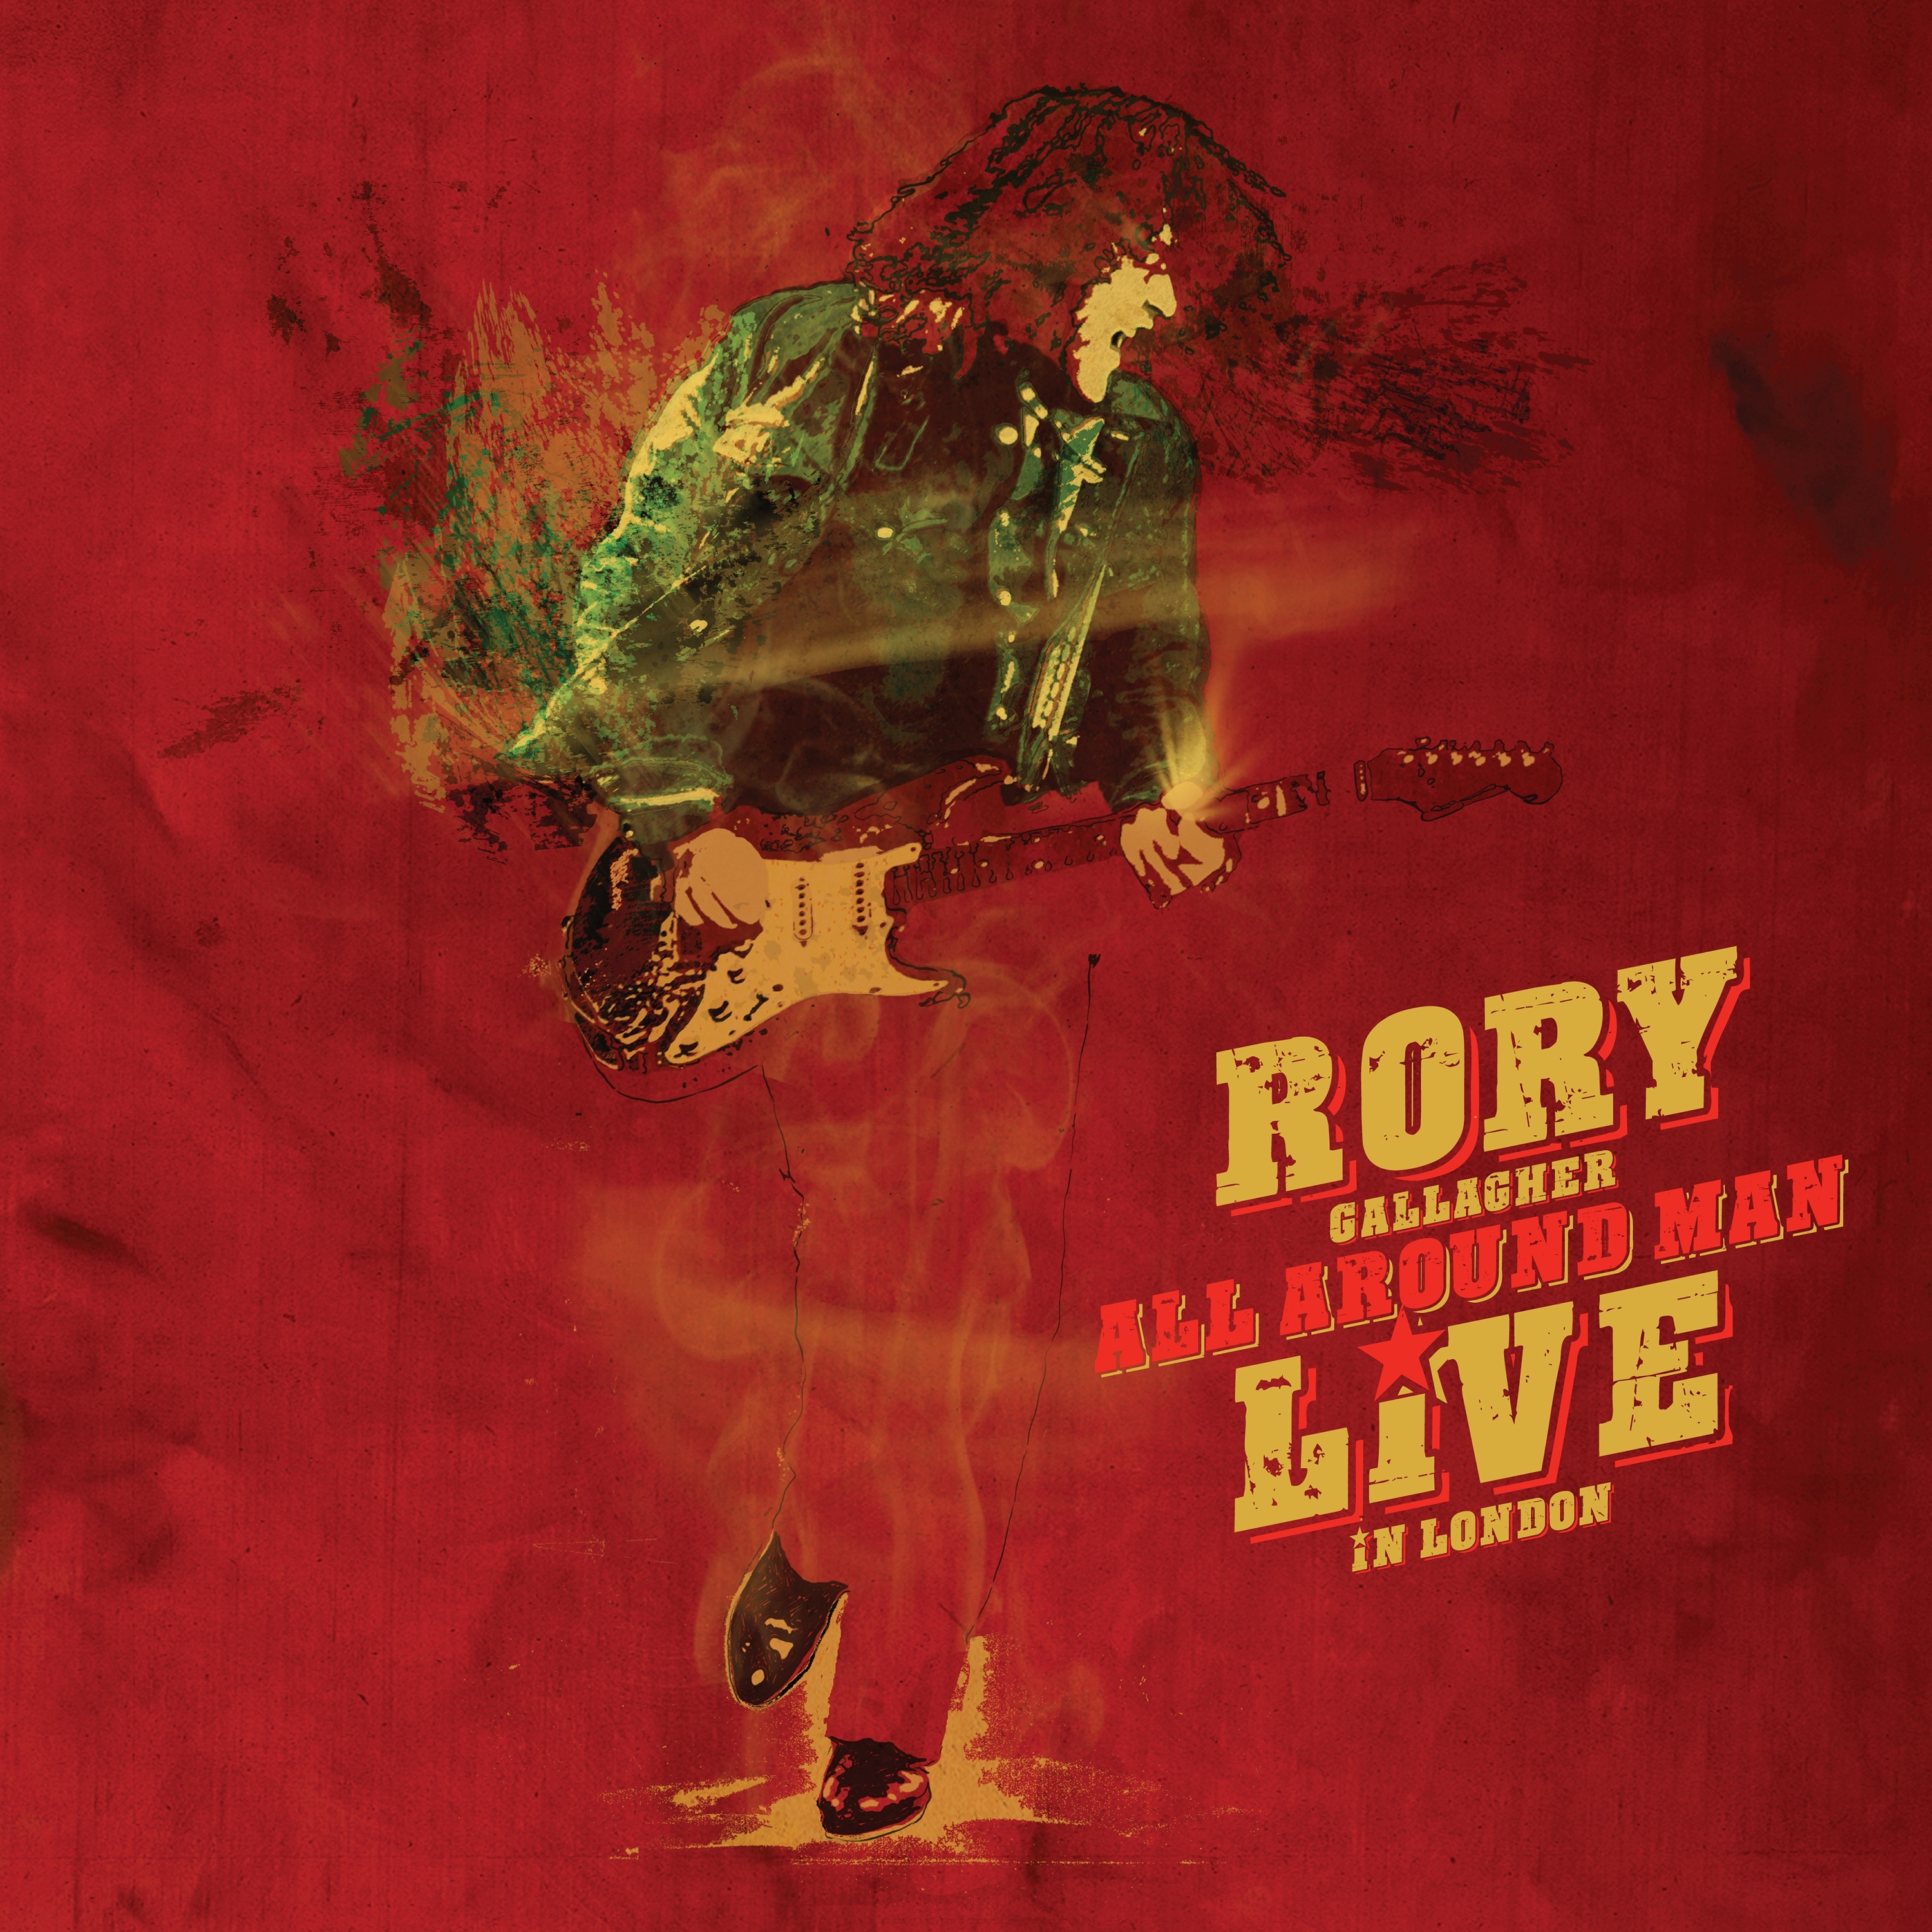 Rory Gallagher All Around Man: Live in London (CD) 2CD - Photo 1/1